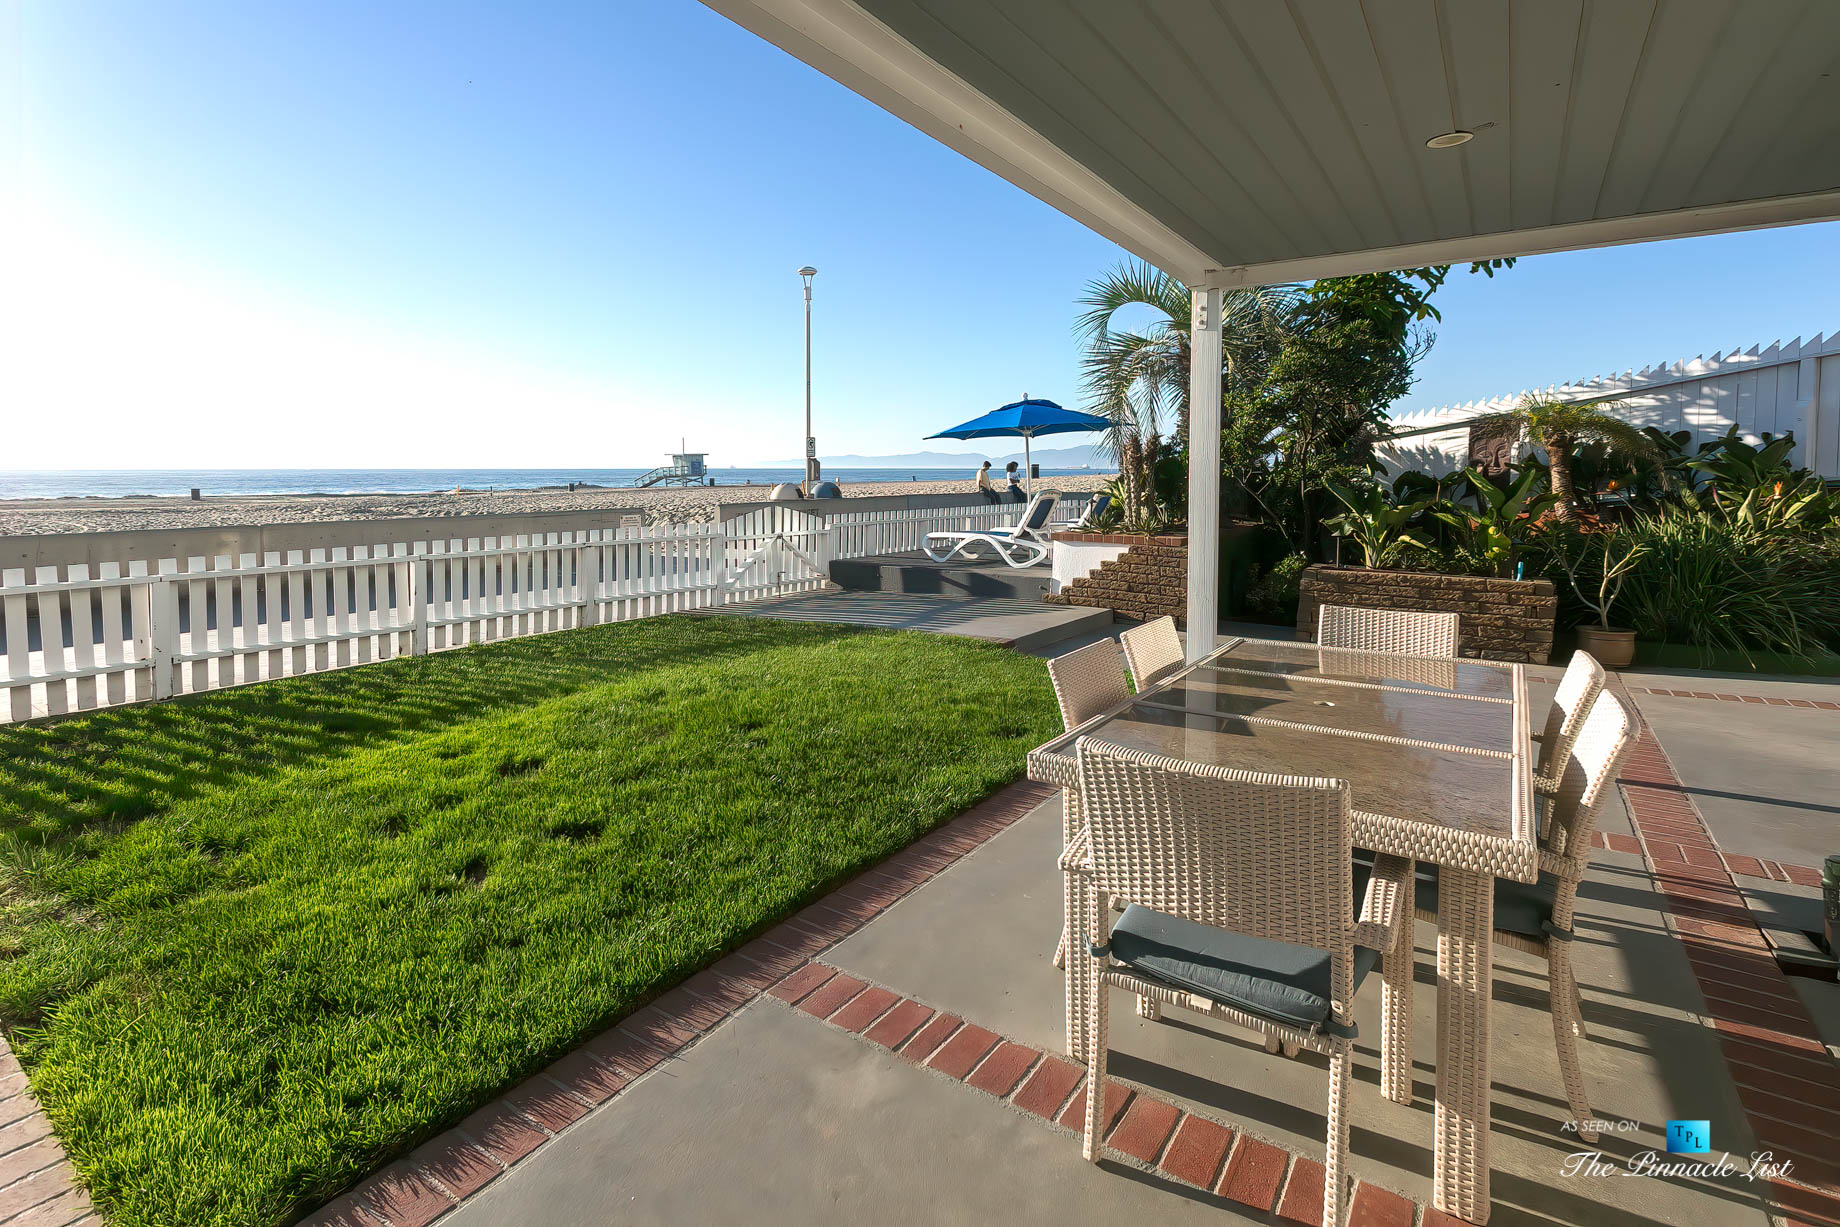 3500 The Strand, Hermosa Beach, CA, USA – Outdoor Covered Patio – Luxury Real Estate – Original 90210 Beach House – Oceanfront Home